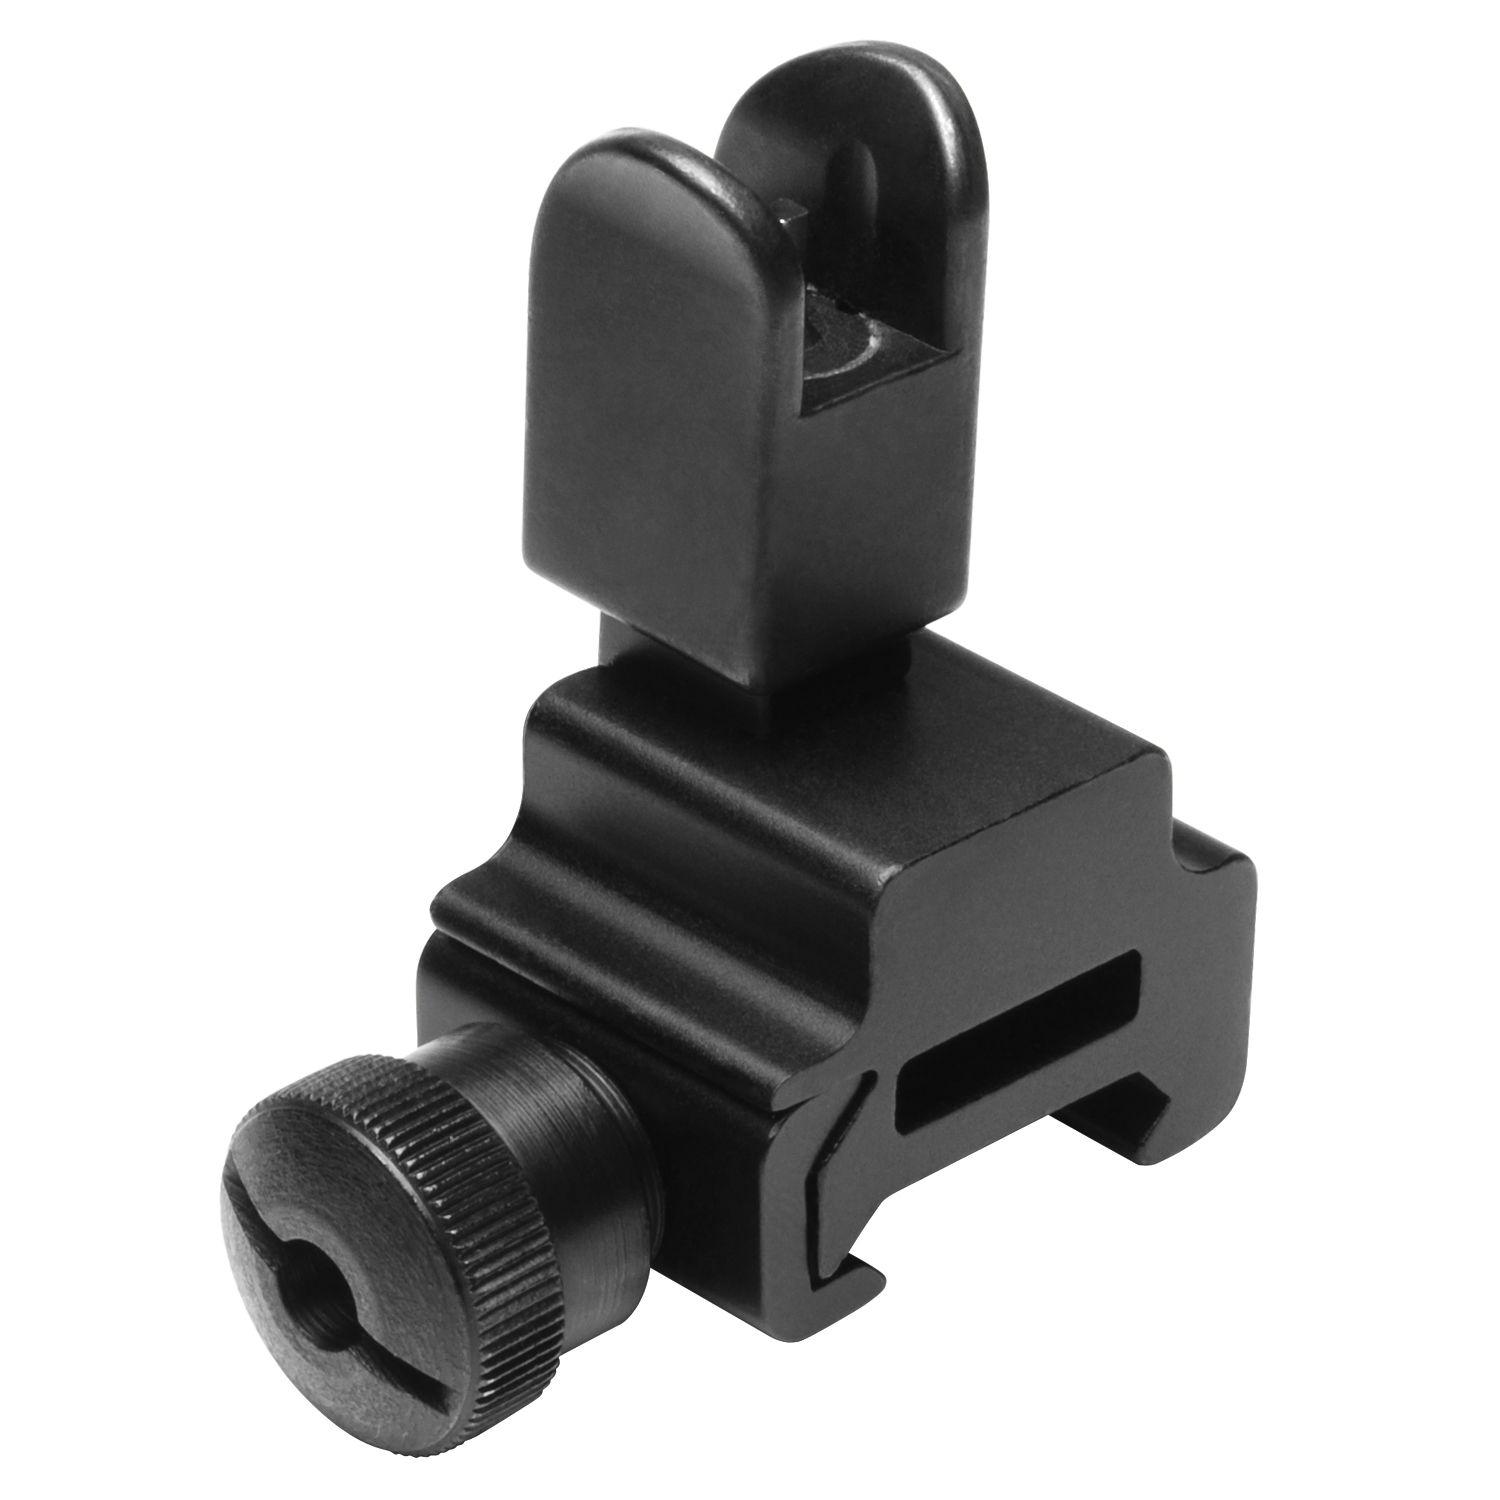 Ncstar AR-15 Style Metal Flip-Up Front Sight